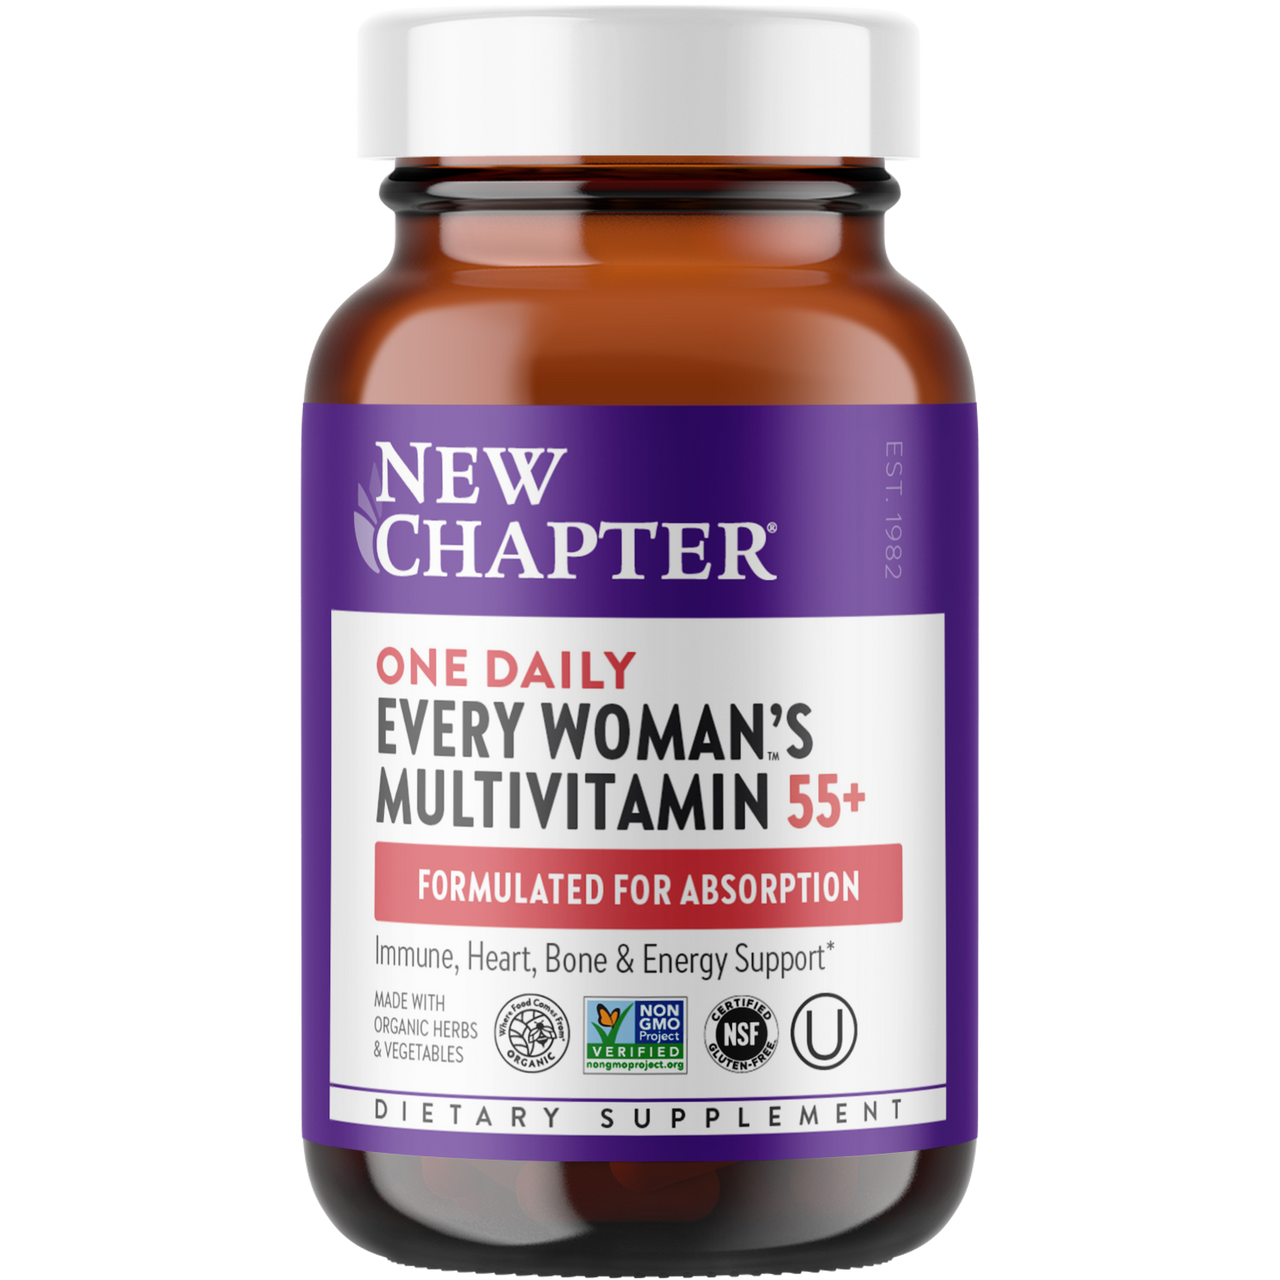 New Chapter Every Woman™'s One Daily 55+ Multivitamin (72 tablets)